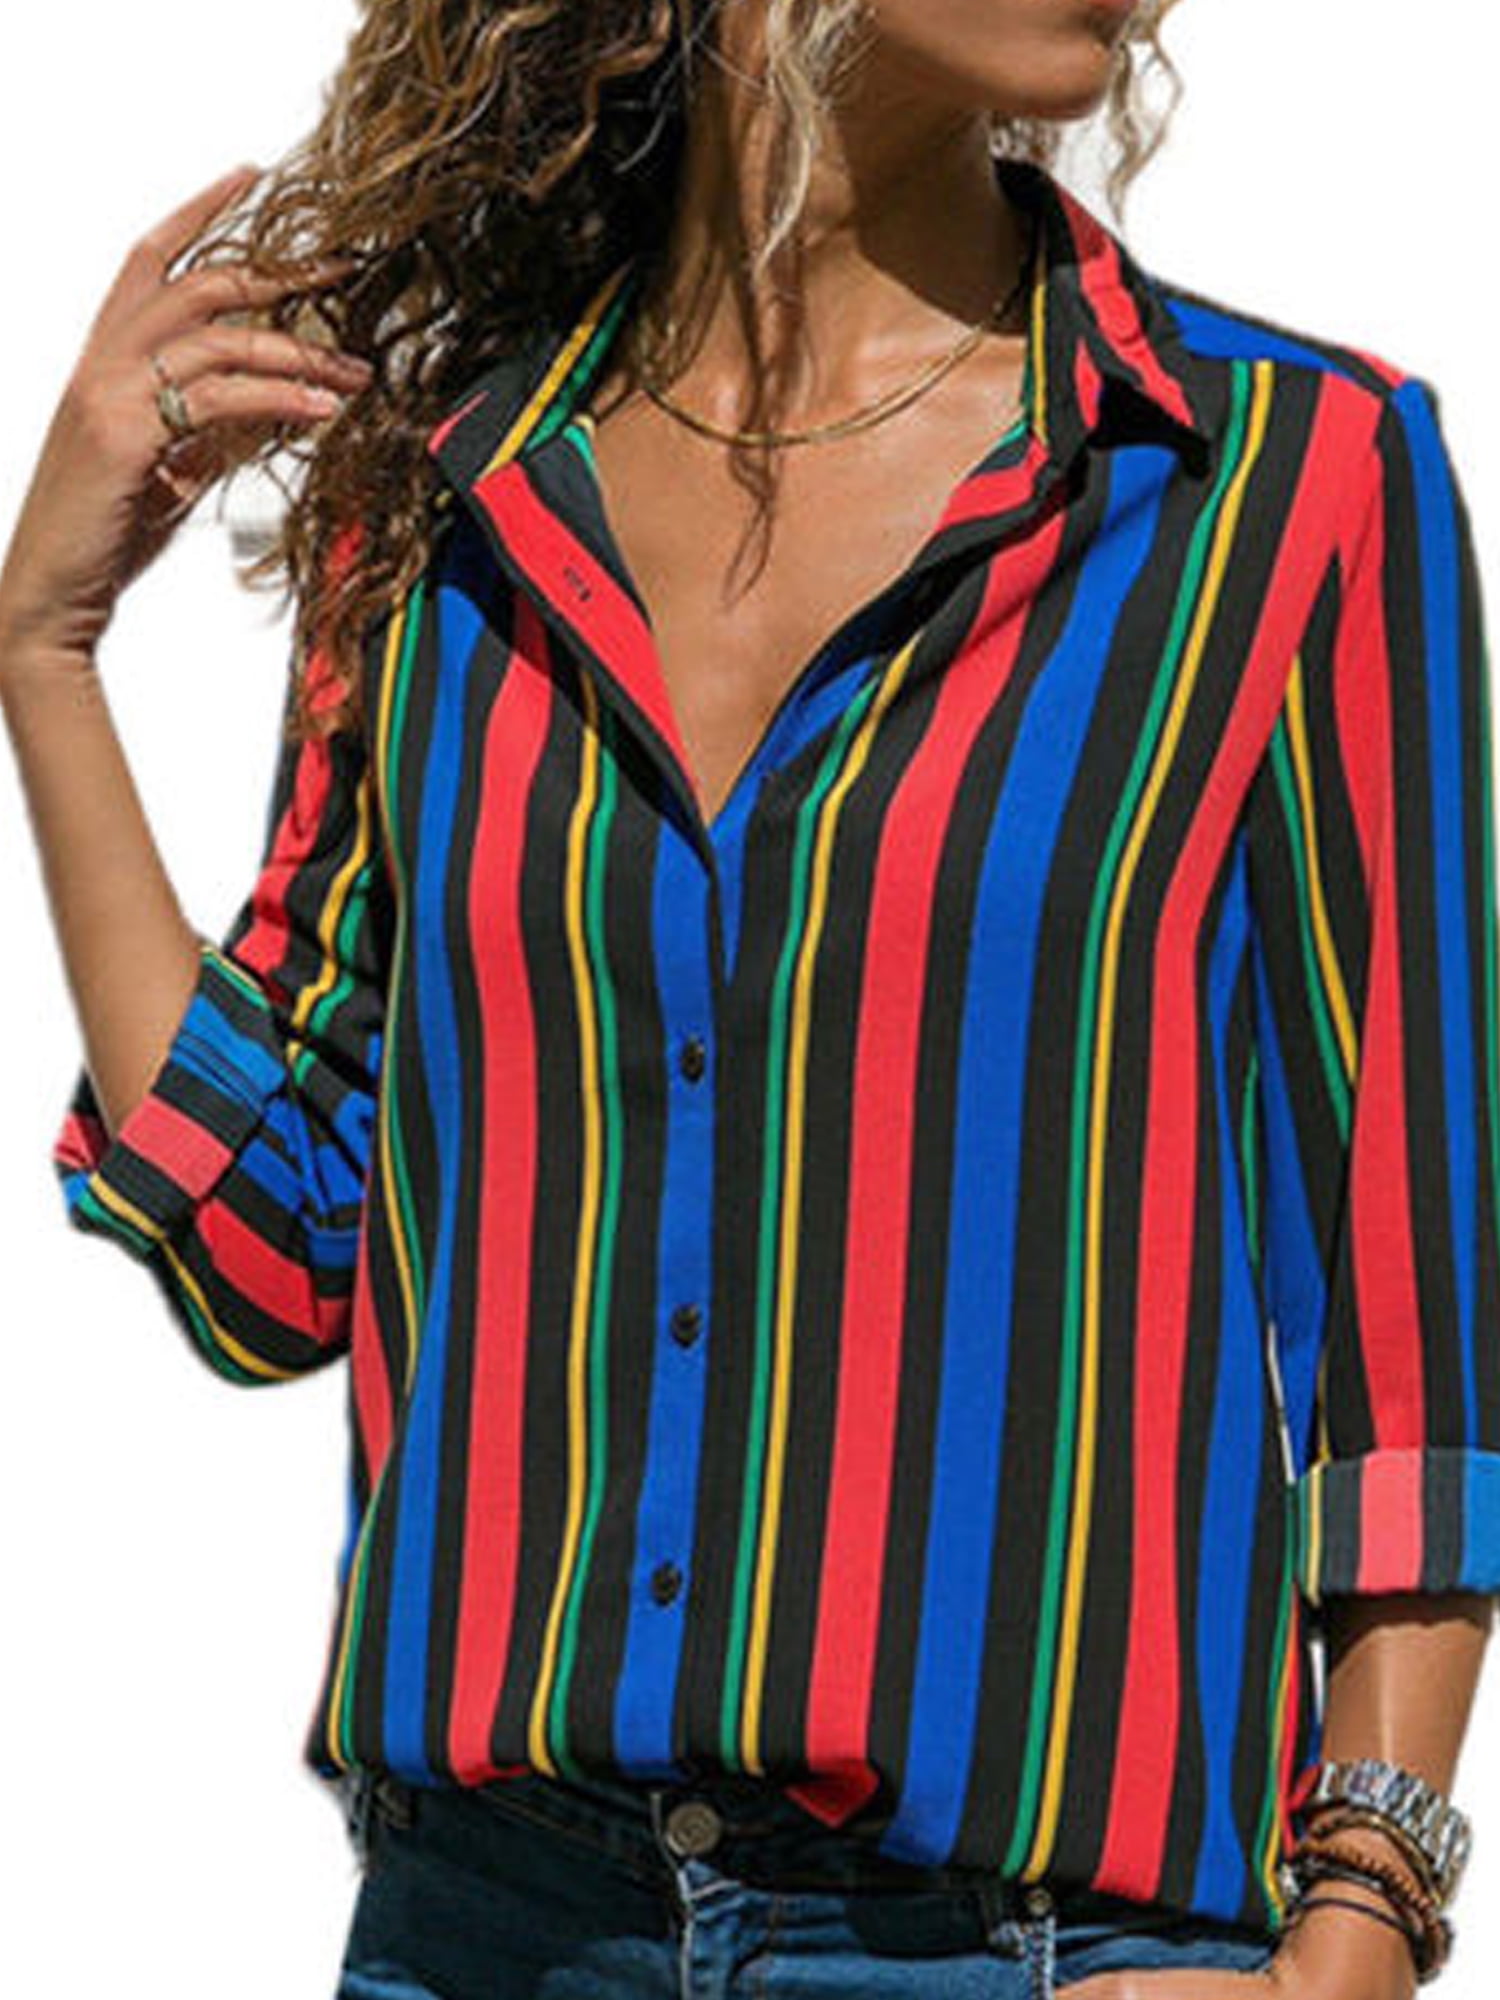 Shirts for Women Office Roll Up Sleeve Tops Casual Striped Button Down Blouse Fashion T Shirts 